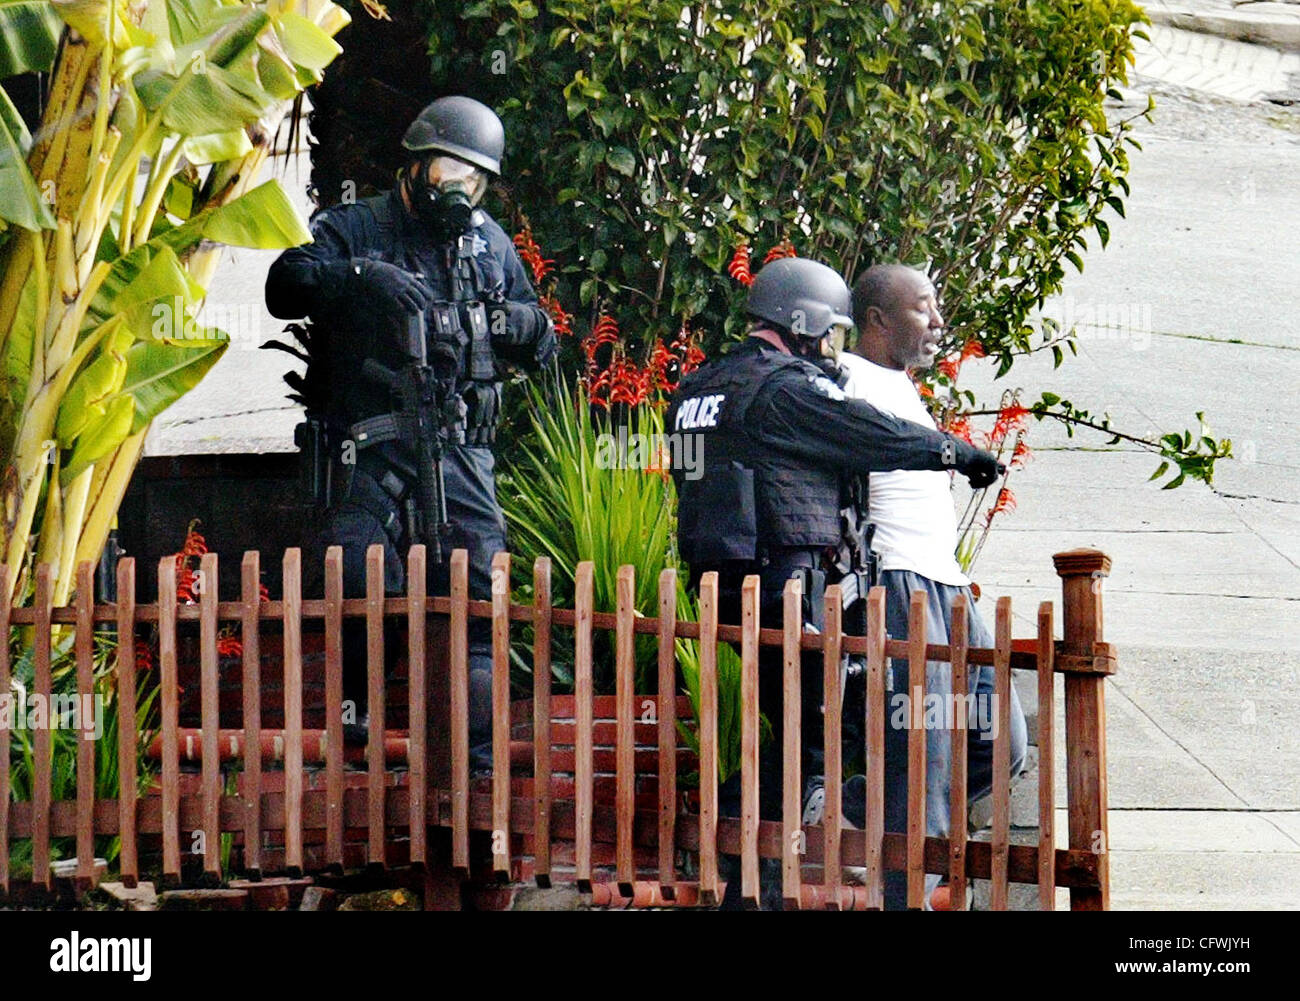 Members of the Oakland Police Department bring out a man who barricaded himself early Tuesday Feb, 27, 2007 on the 2800 block of Brookdale Avenue in Oakland, Calif. The police shot tear gas inside the house to force the entry and succesfully avoid injuries. (Ray Chavez/The Oakland Tribune) Stock Photo